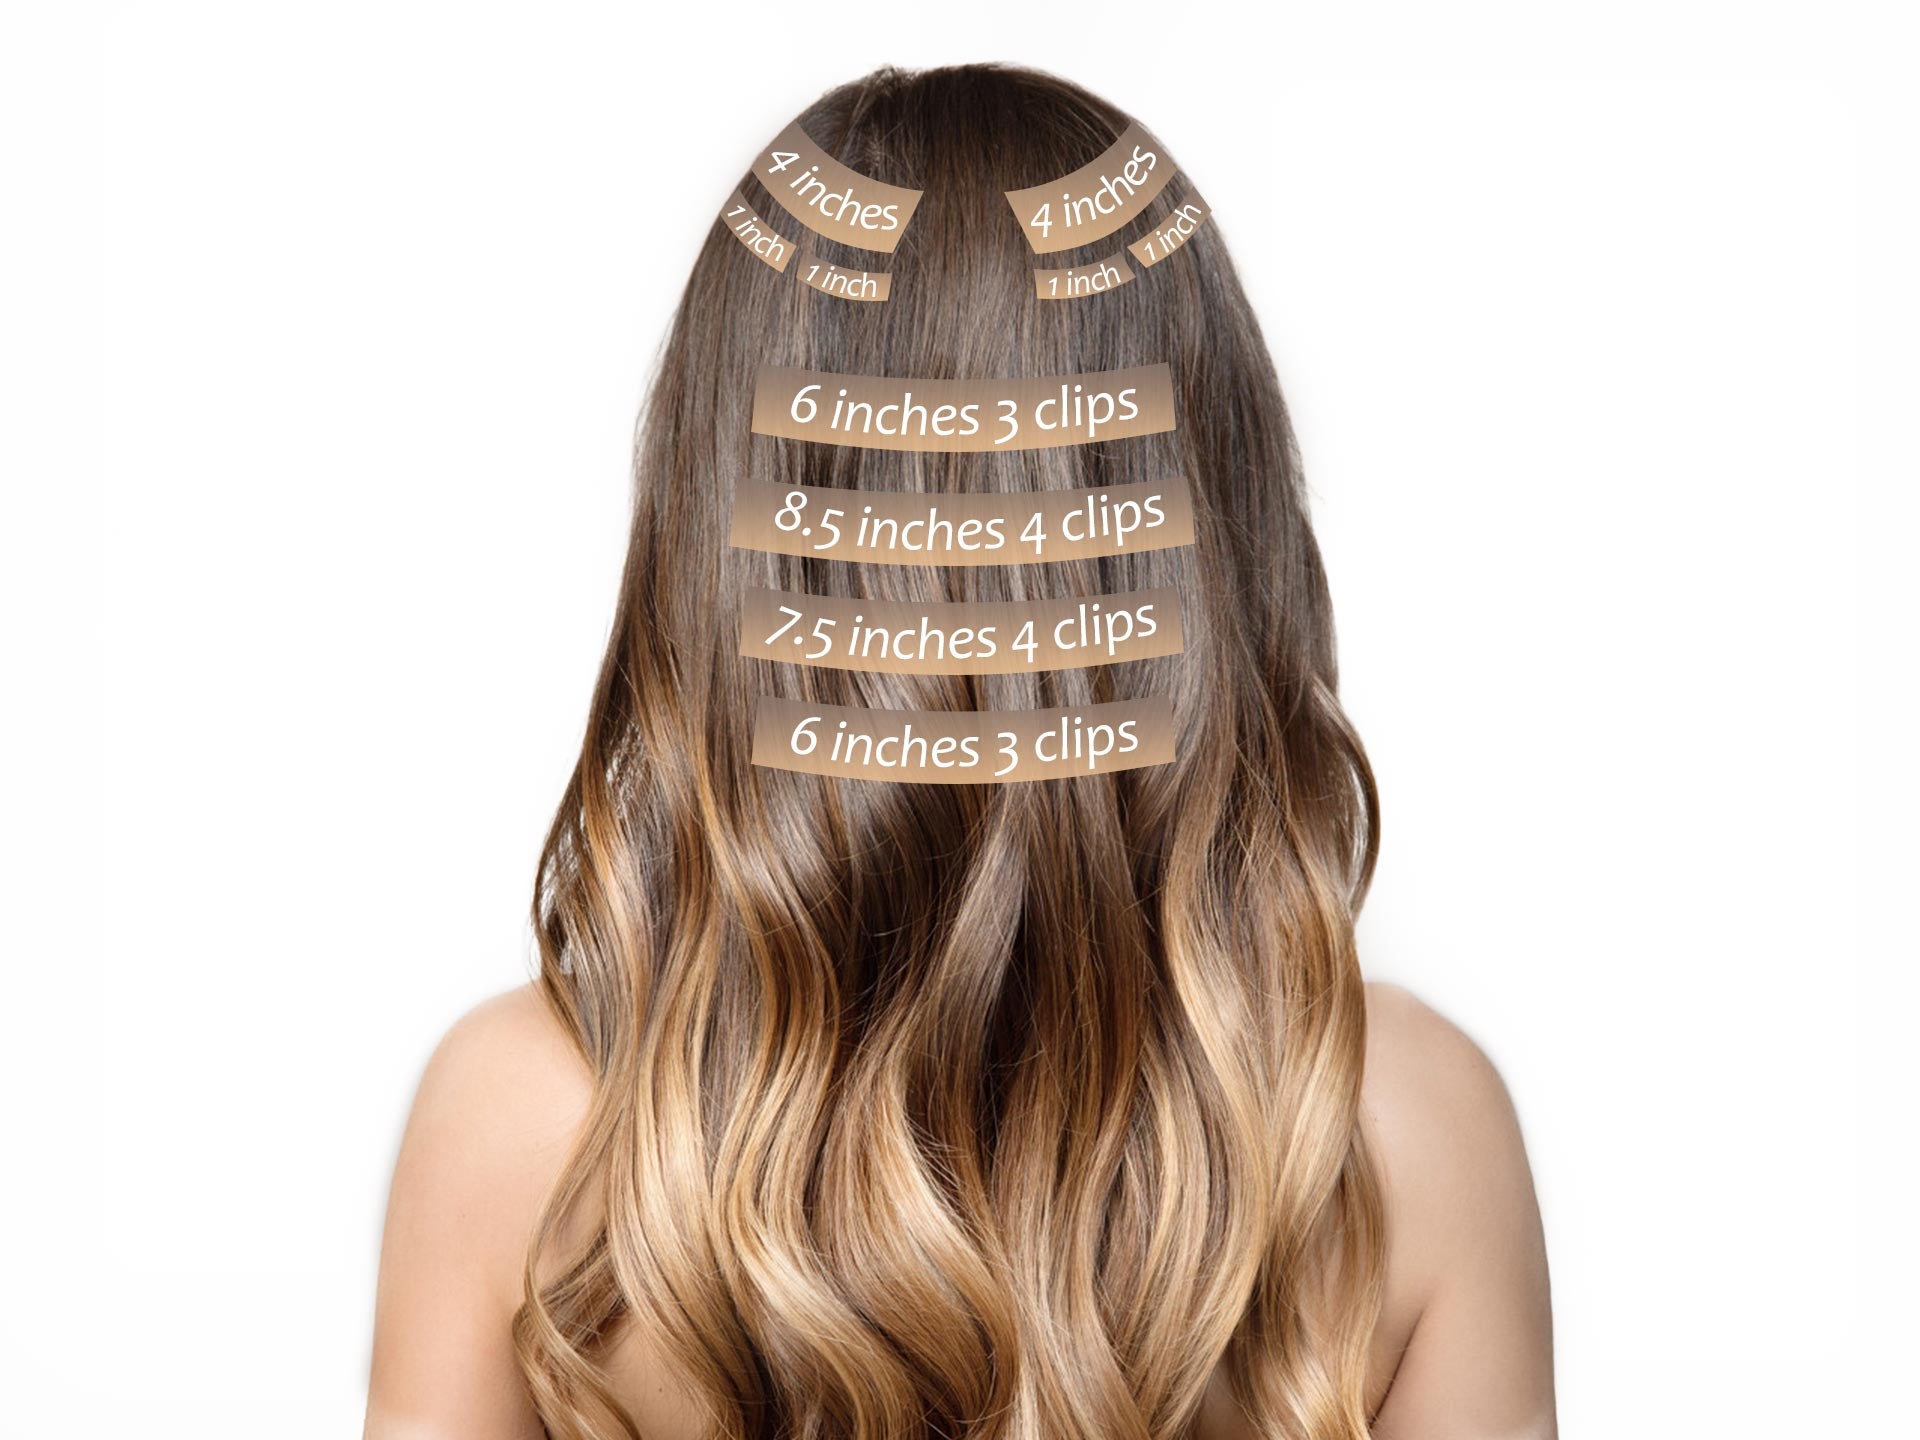 Clip In Hair Extensions
2. Remy Human Hair Extensions - wide 9